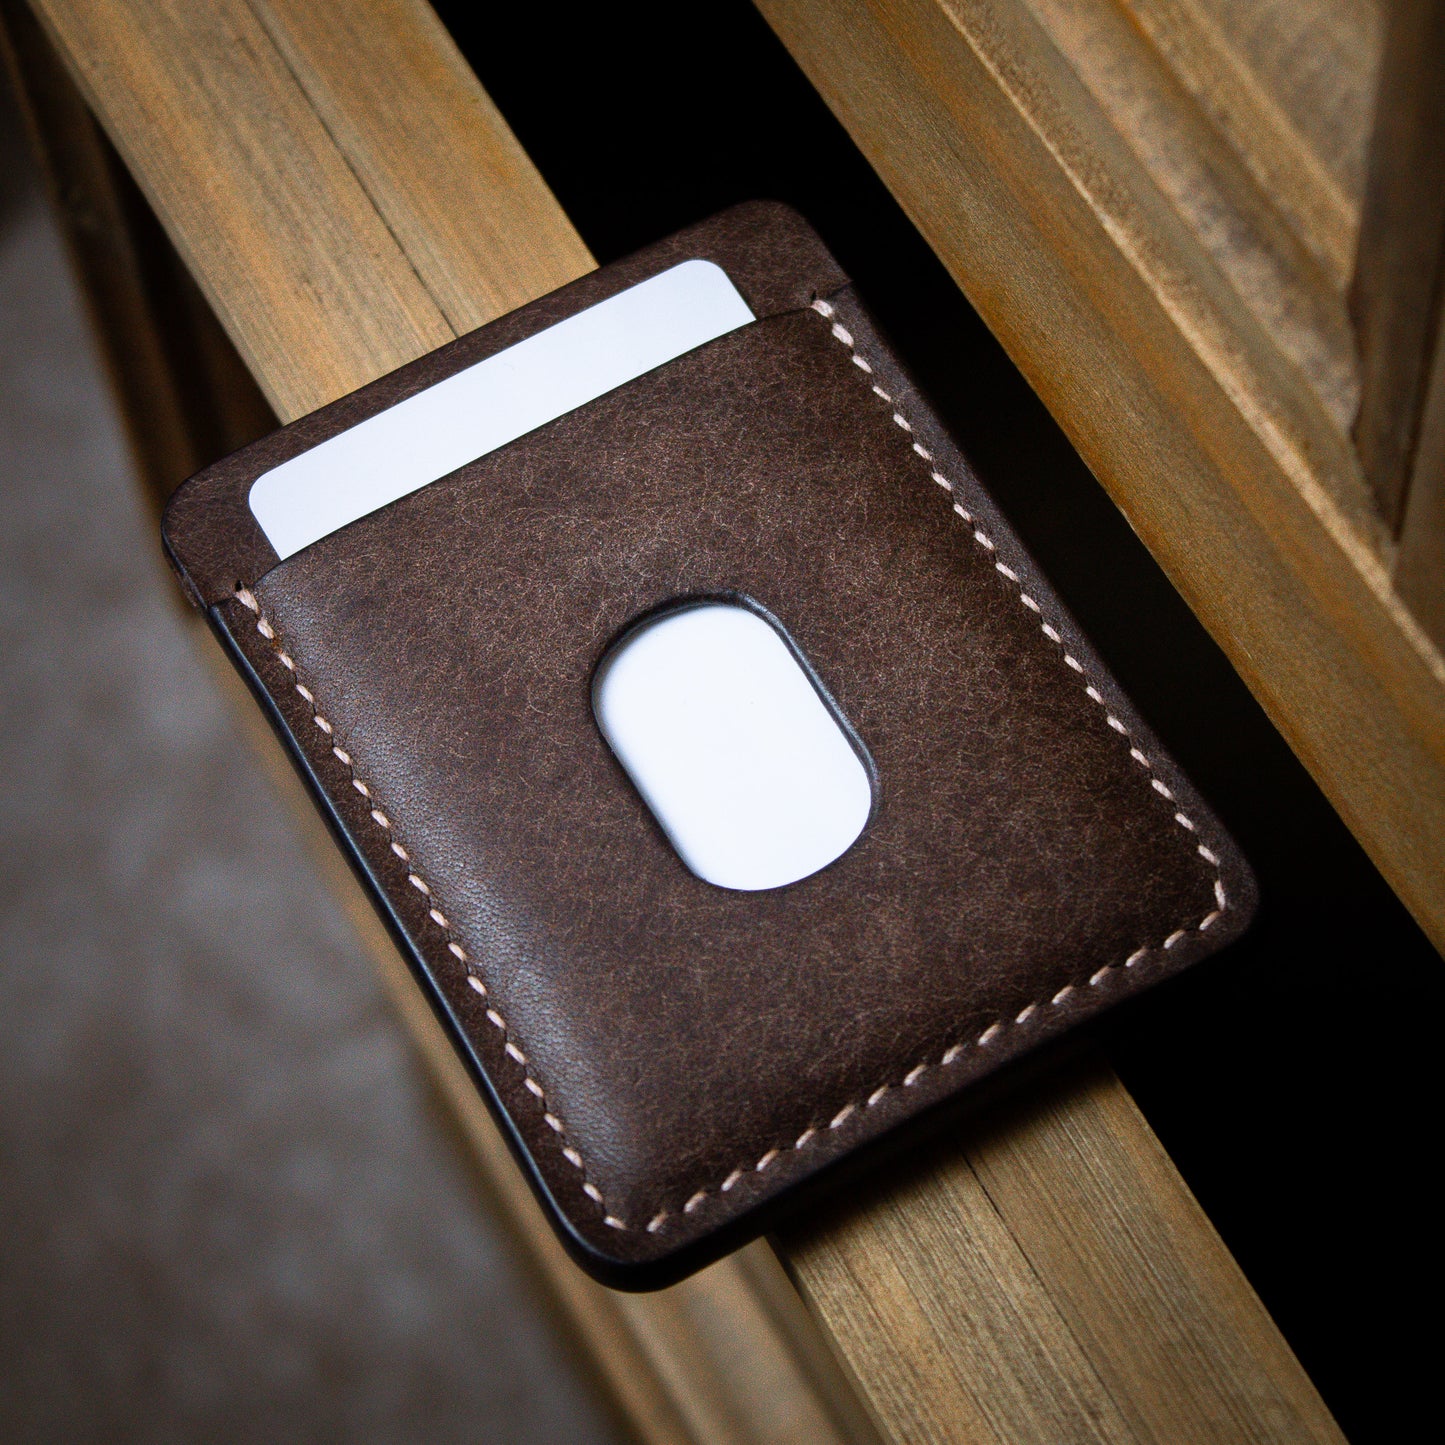 Brown leather cardholder with quick access slot on top of wooden dresser